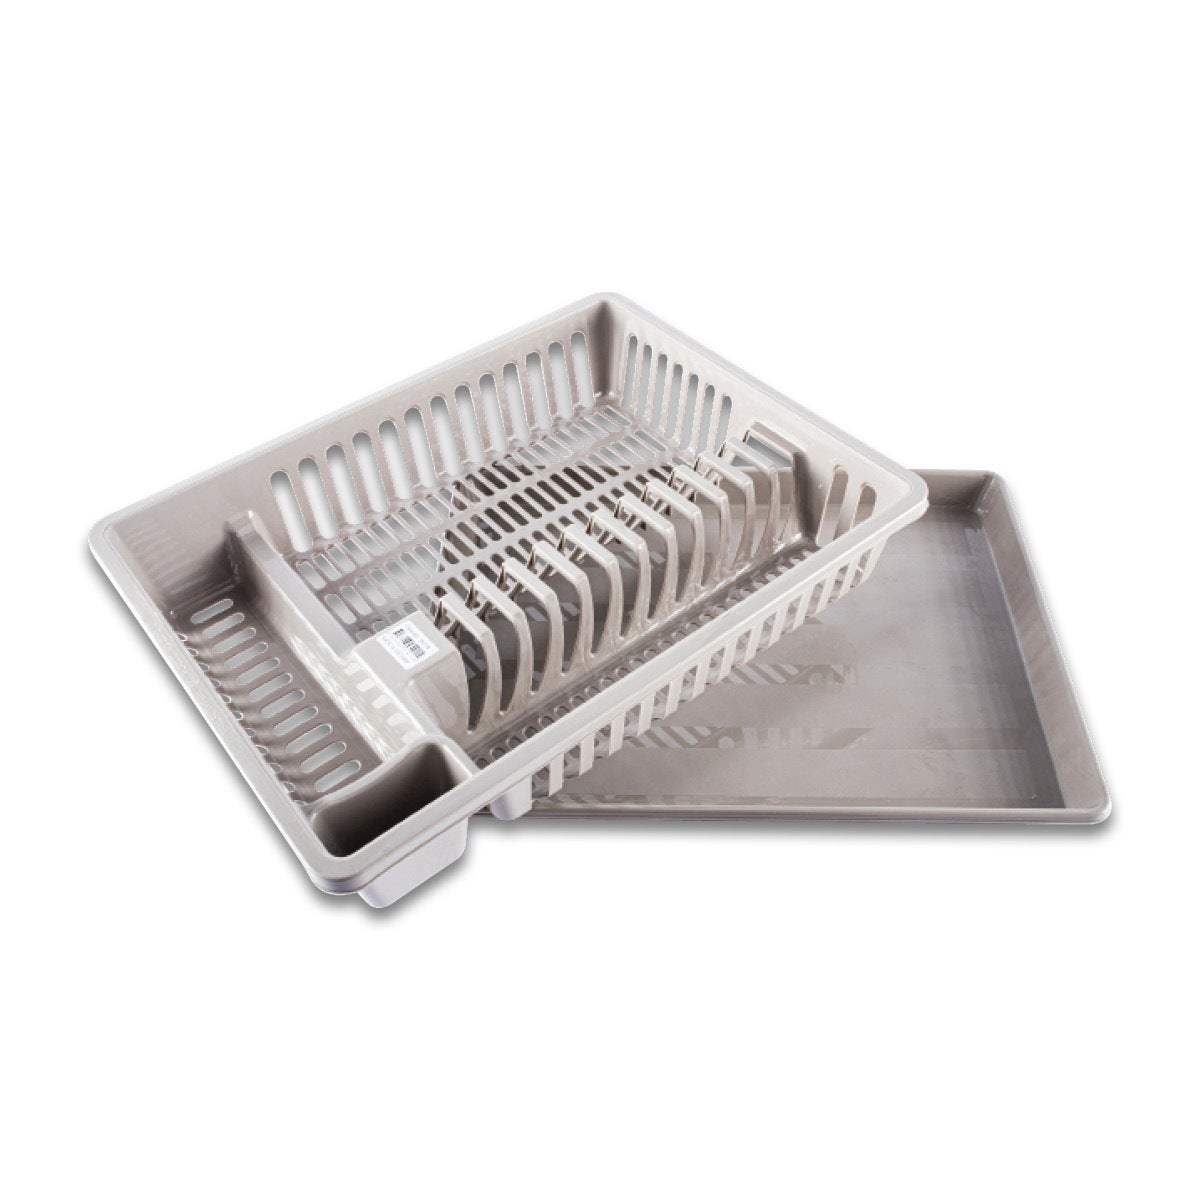 Home Master Dish & Cutlery Rack With Draining Tray Sturdy Compartments